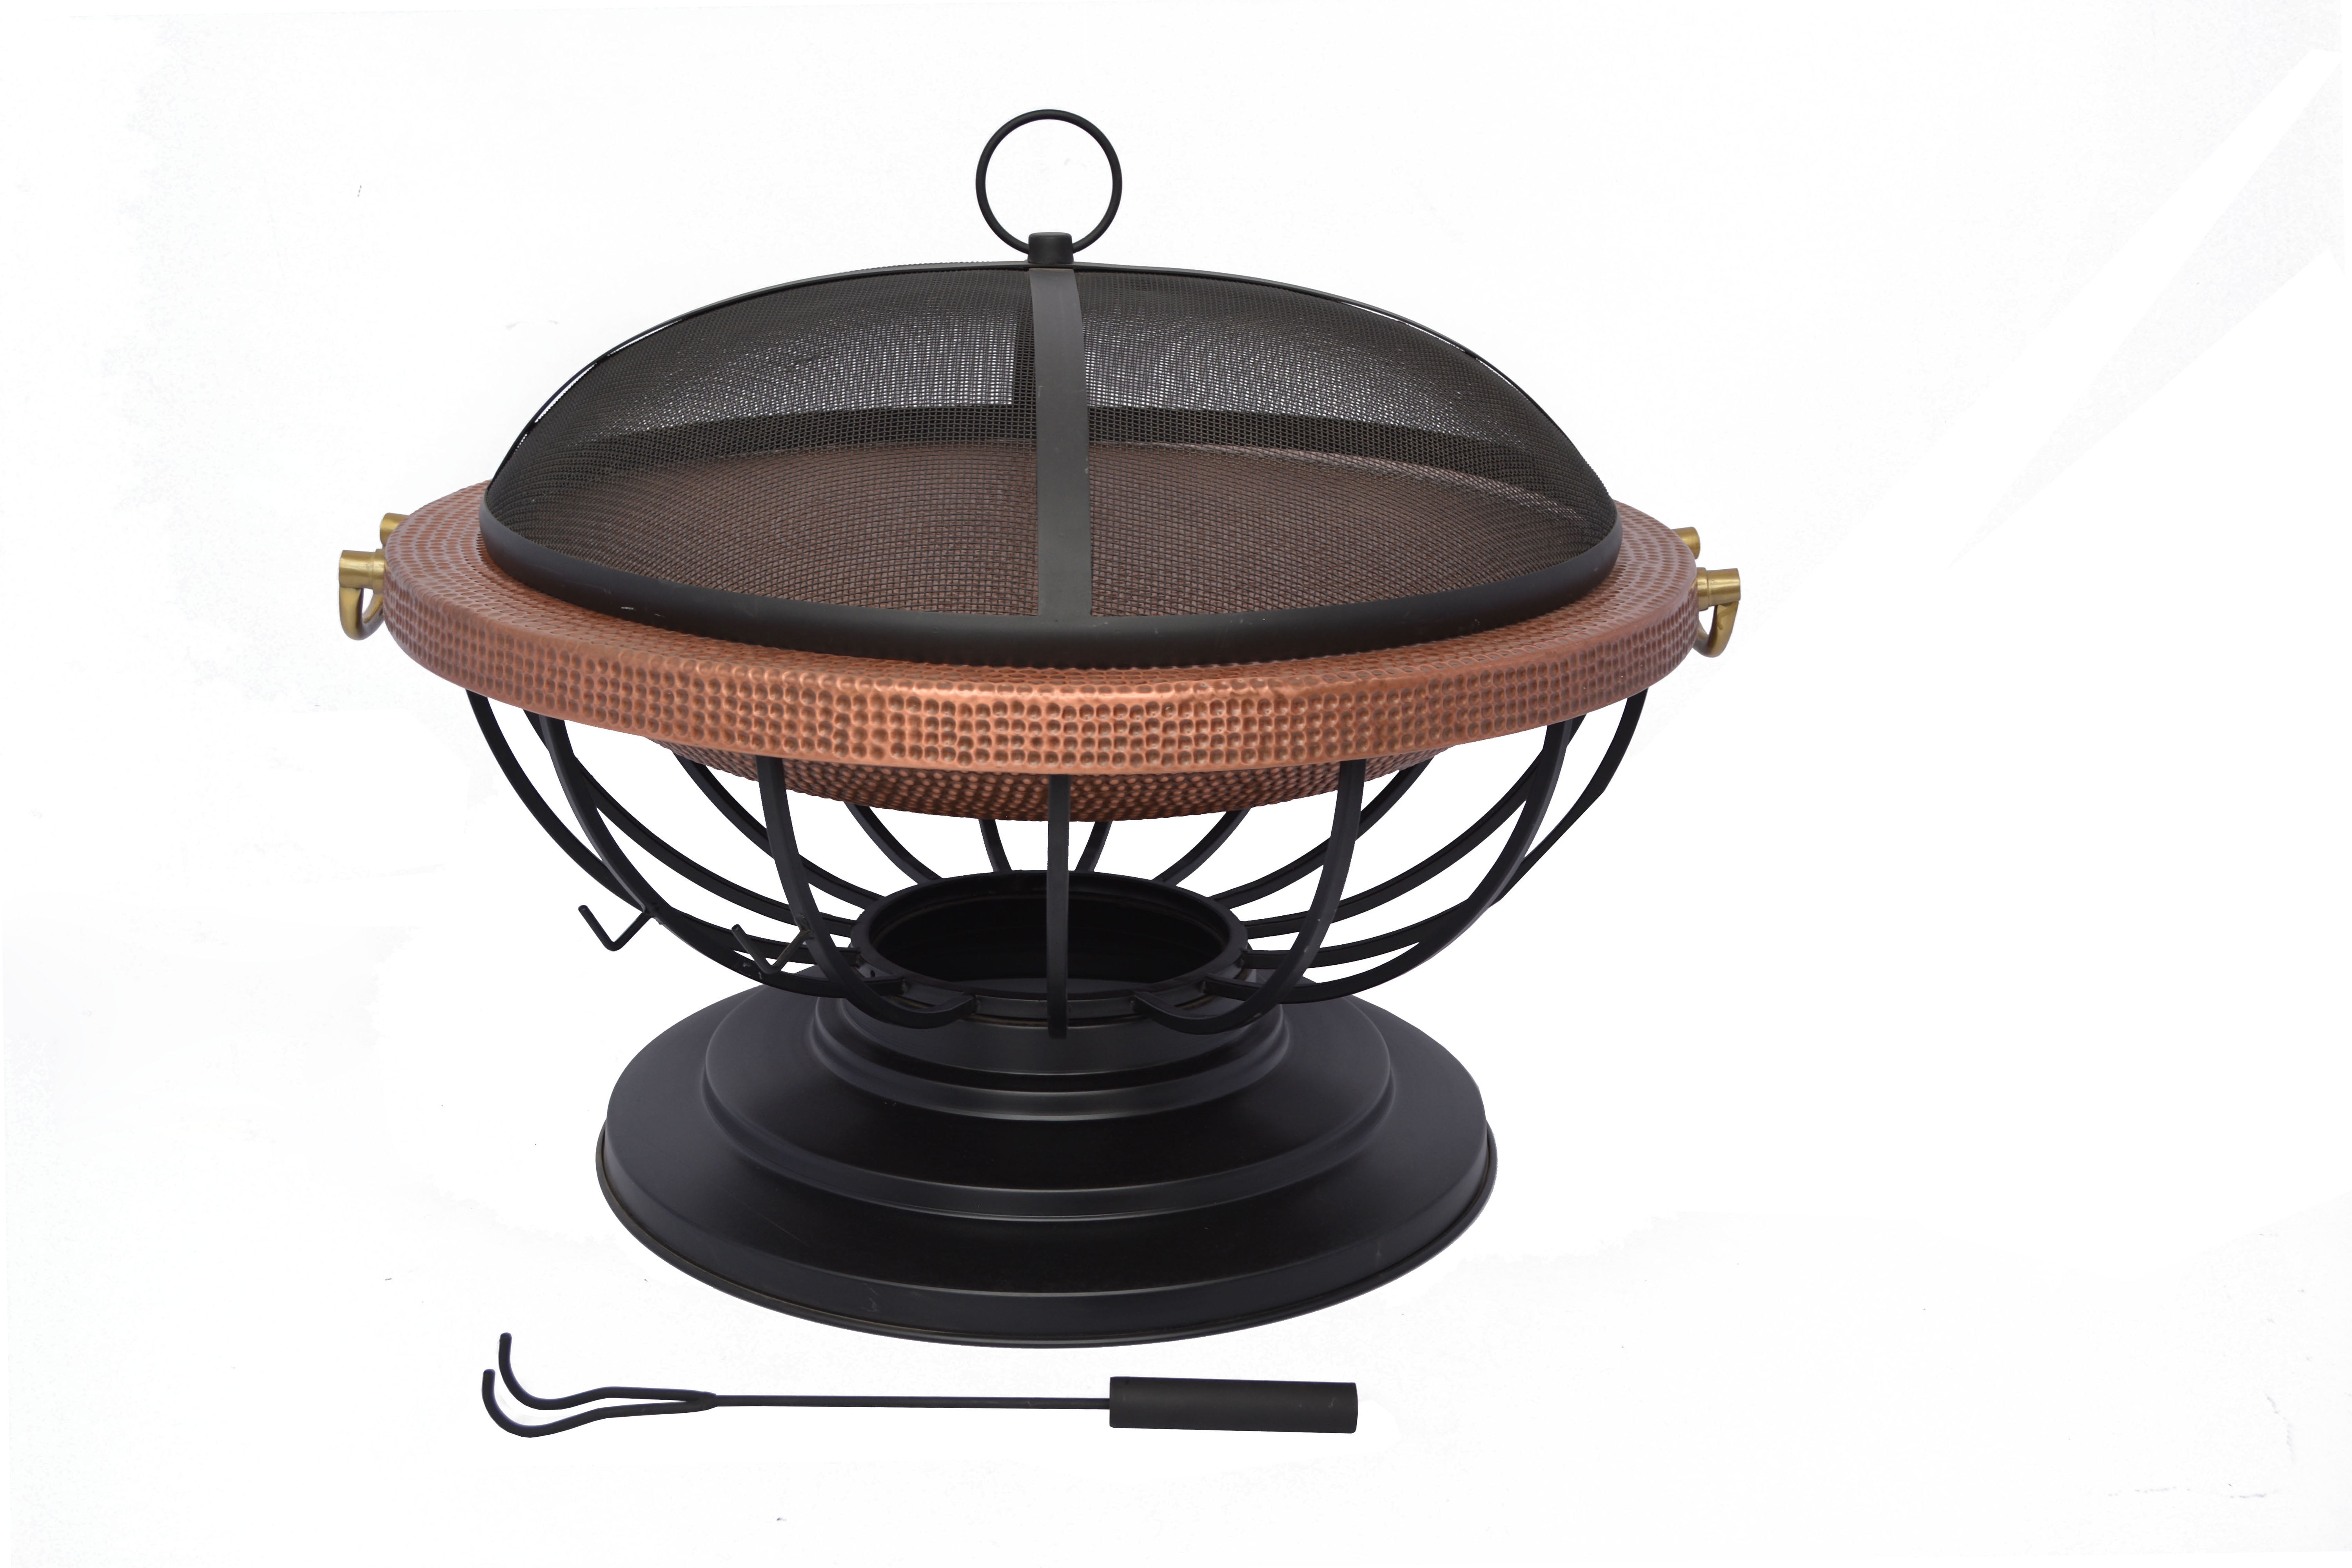 Hammered Copper Fire Pit With Tabletop, Hammered Copper Fire Pit Table